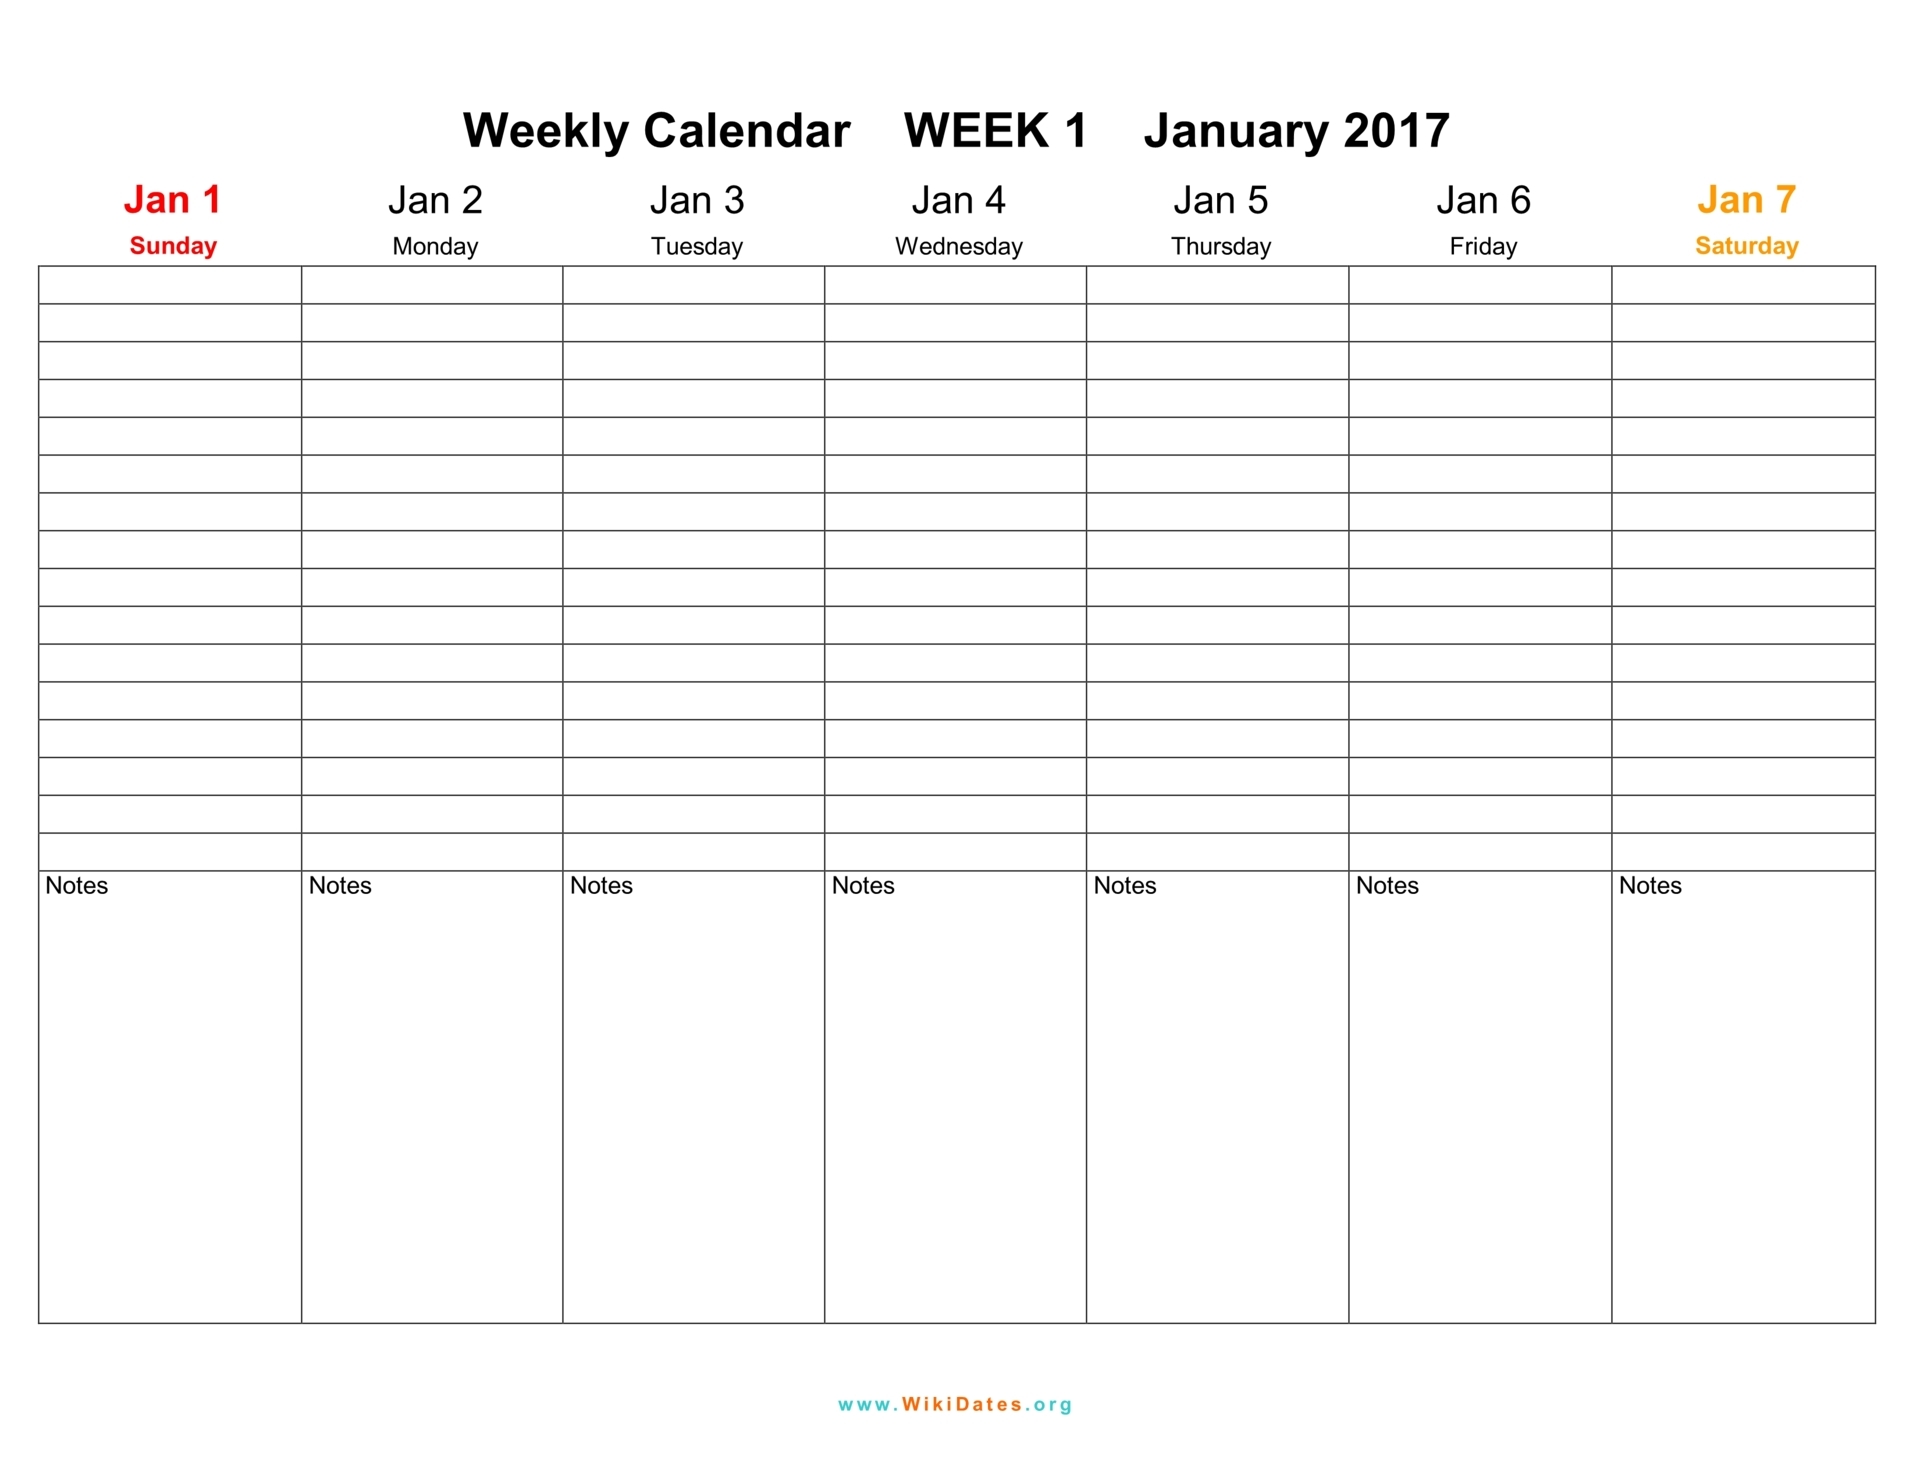 Week Calender Template from www.wikidates.org